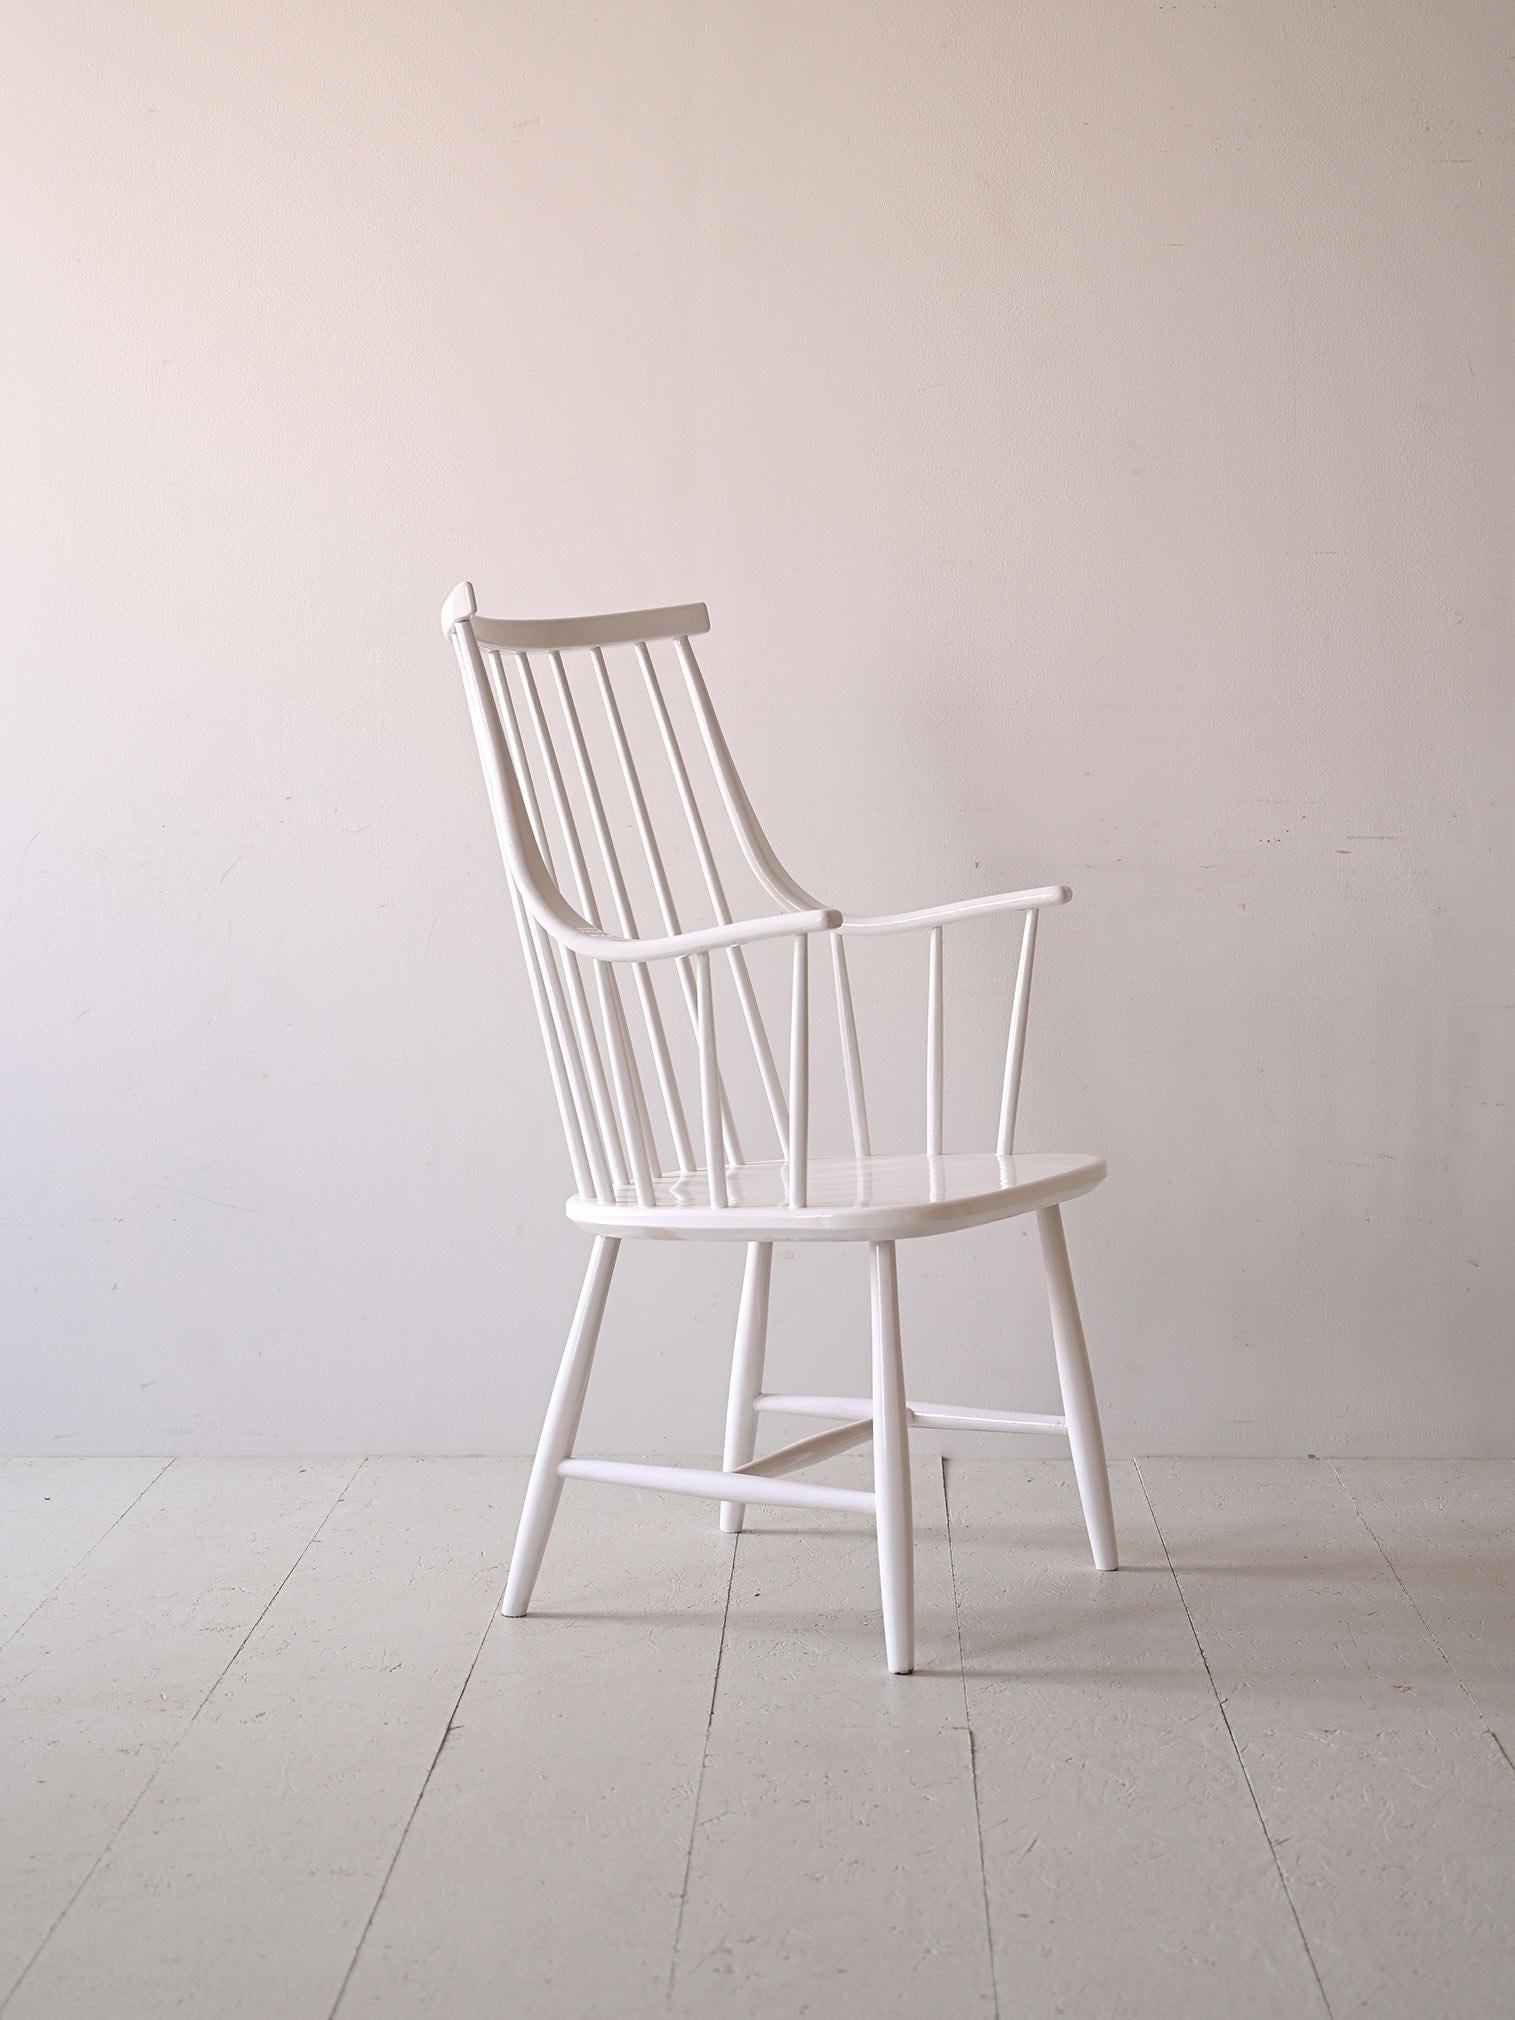 Wooden chair with original vintage arms model 'Grandessa' designed by designer Lena Larsson in the 1950s.
The frame is painted white and has the original stamp.

Good condition. A conservative restoration has been done. It may show some signs of